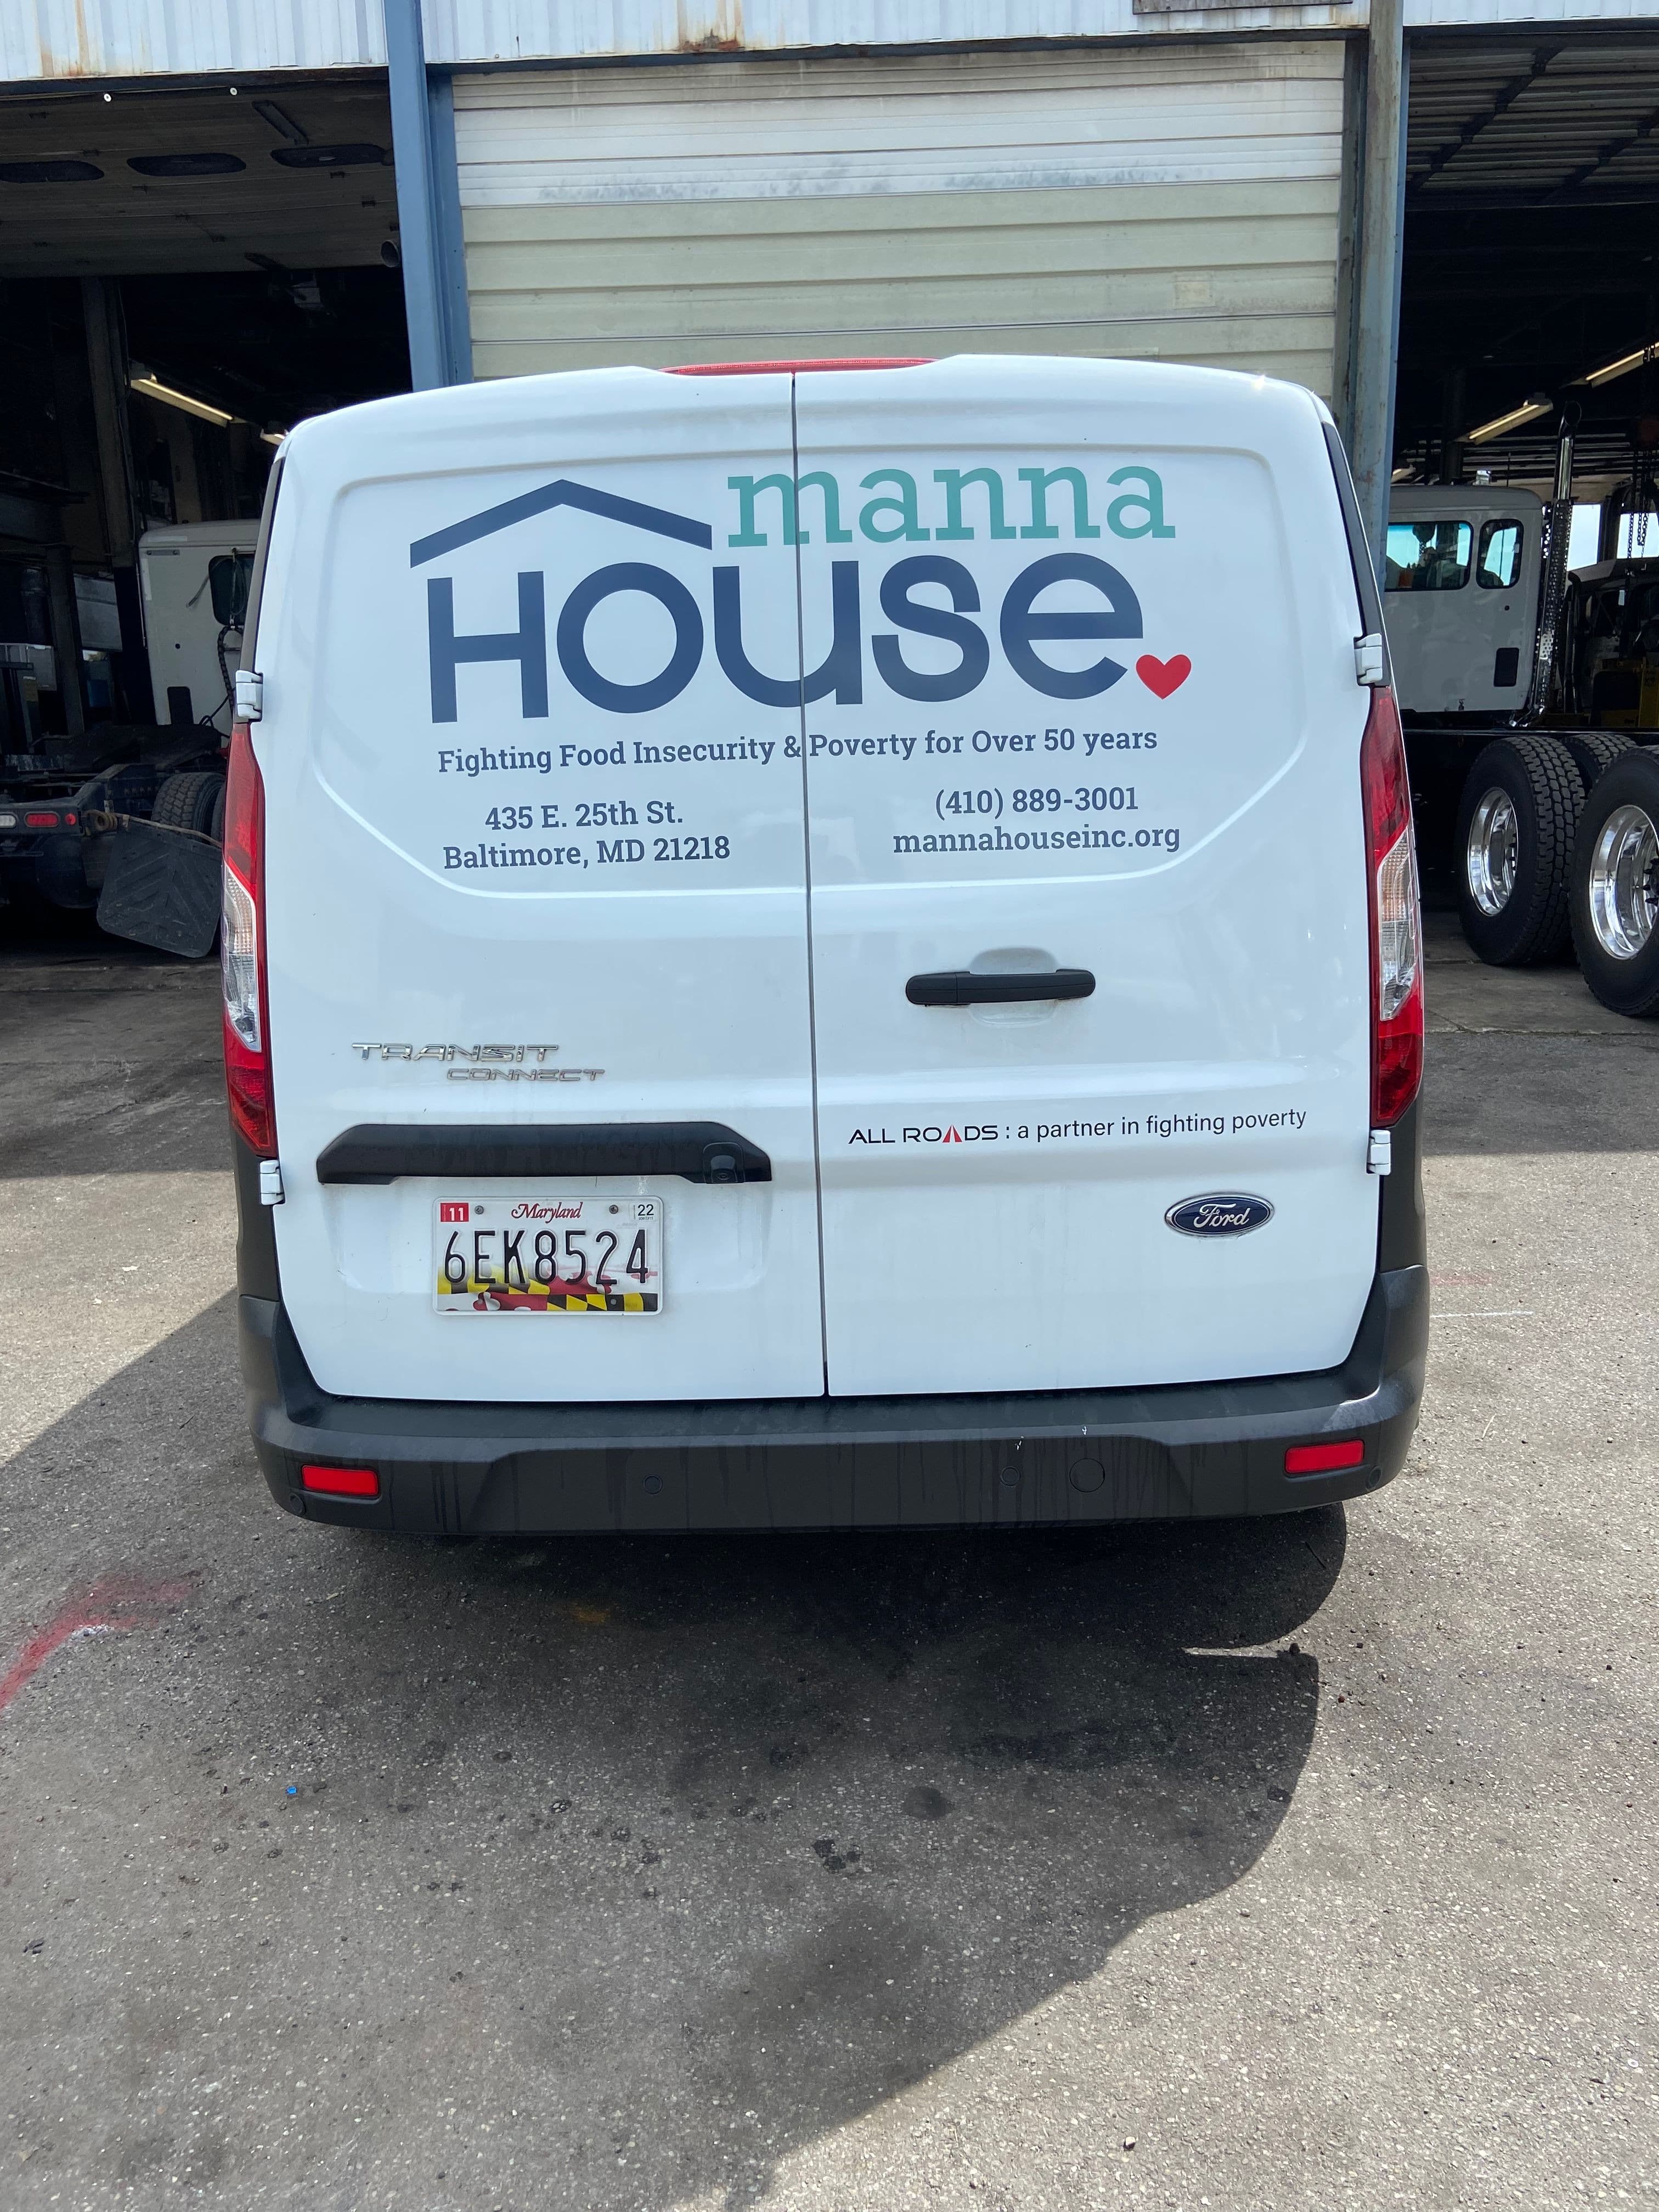 Manna House Decal on the Back of a Van